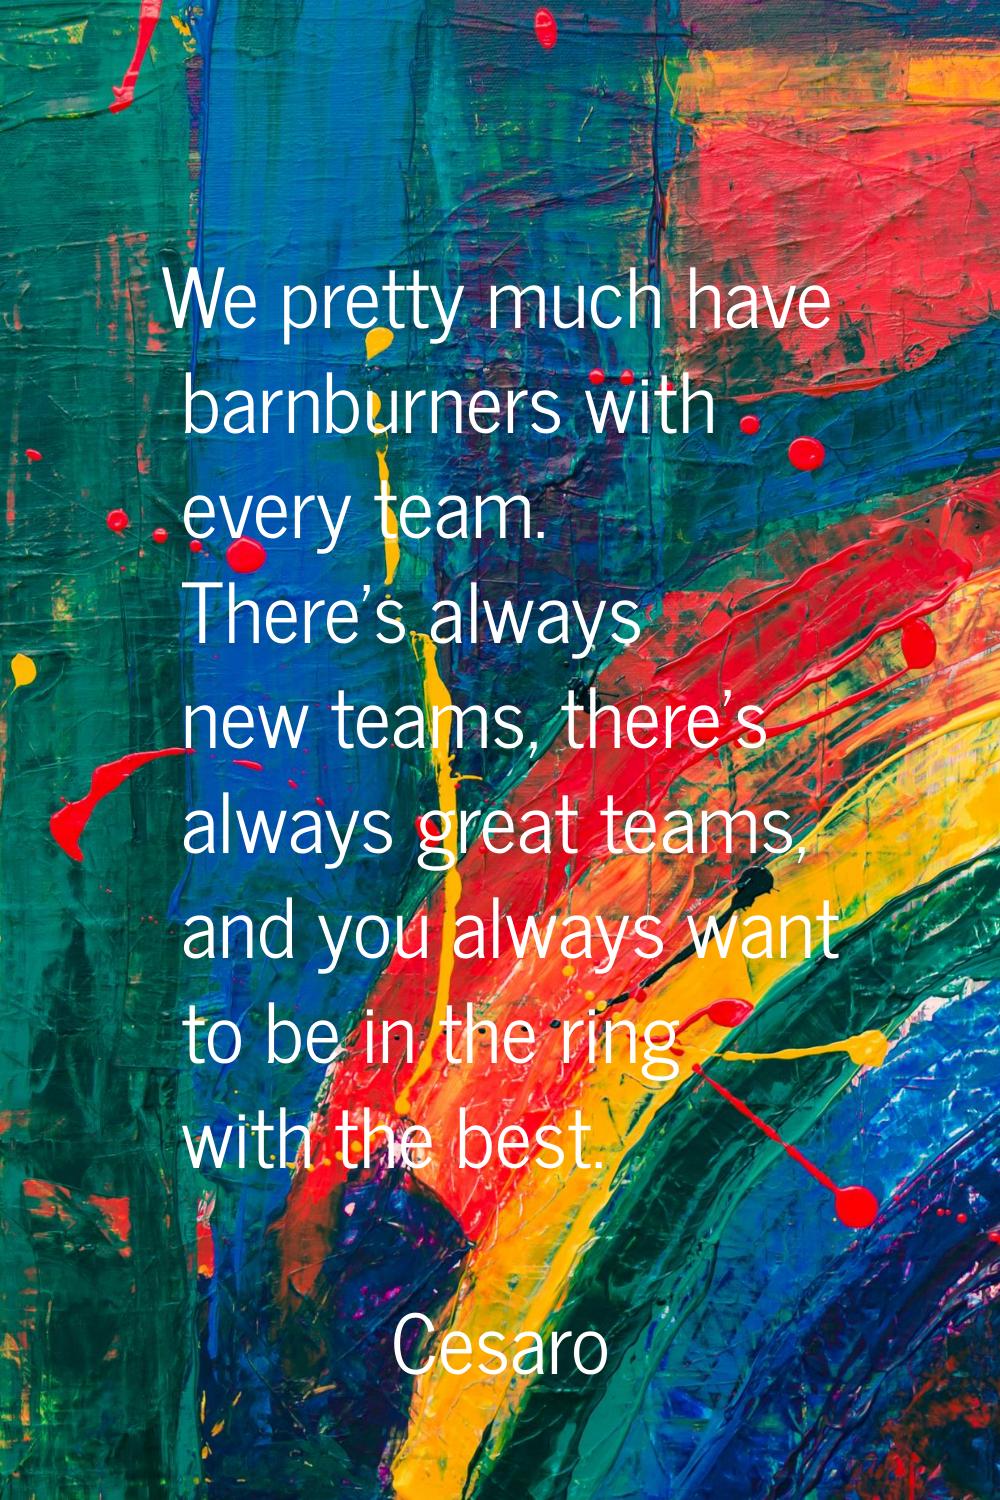 We pretty much have barnburners with every team. There's always new teams, there's always great tea